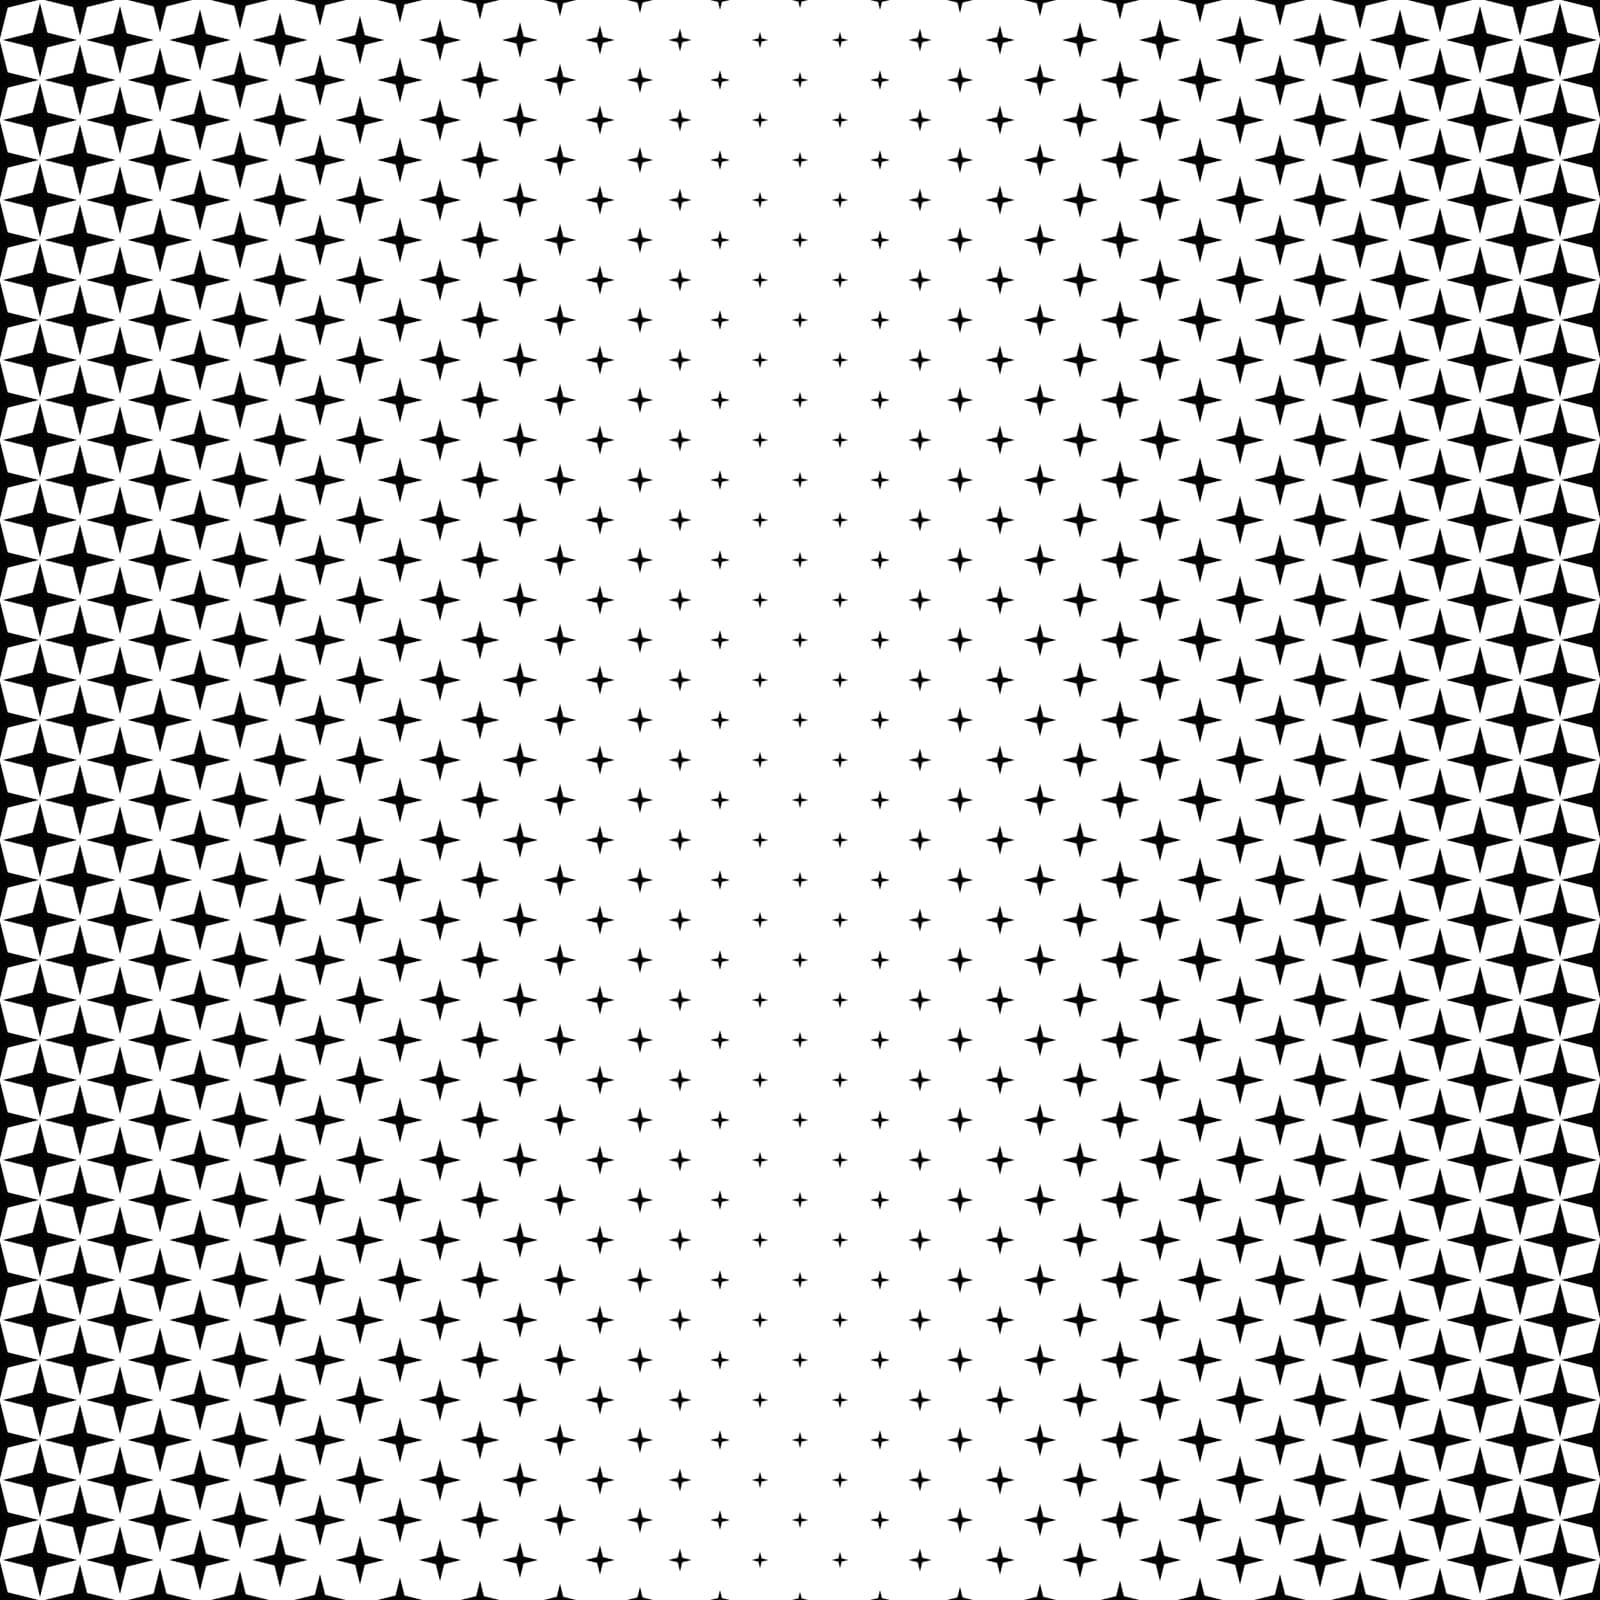 fancy,star,background,pattern,spike,cover,presentation,white,web,decor,seamless,design,repeat,motif,decoration,repeating,brochure,wallpaper,ornate,backdrop,thorn,black,abstract,halftone,grid,geometric,monochrome,style,geometry,repetitive